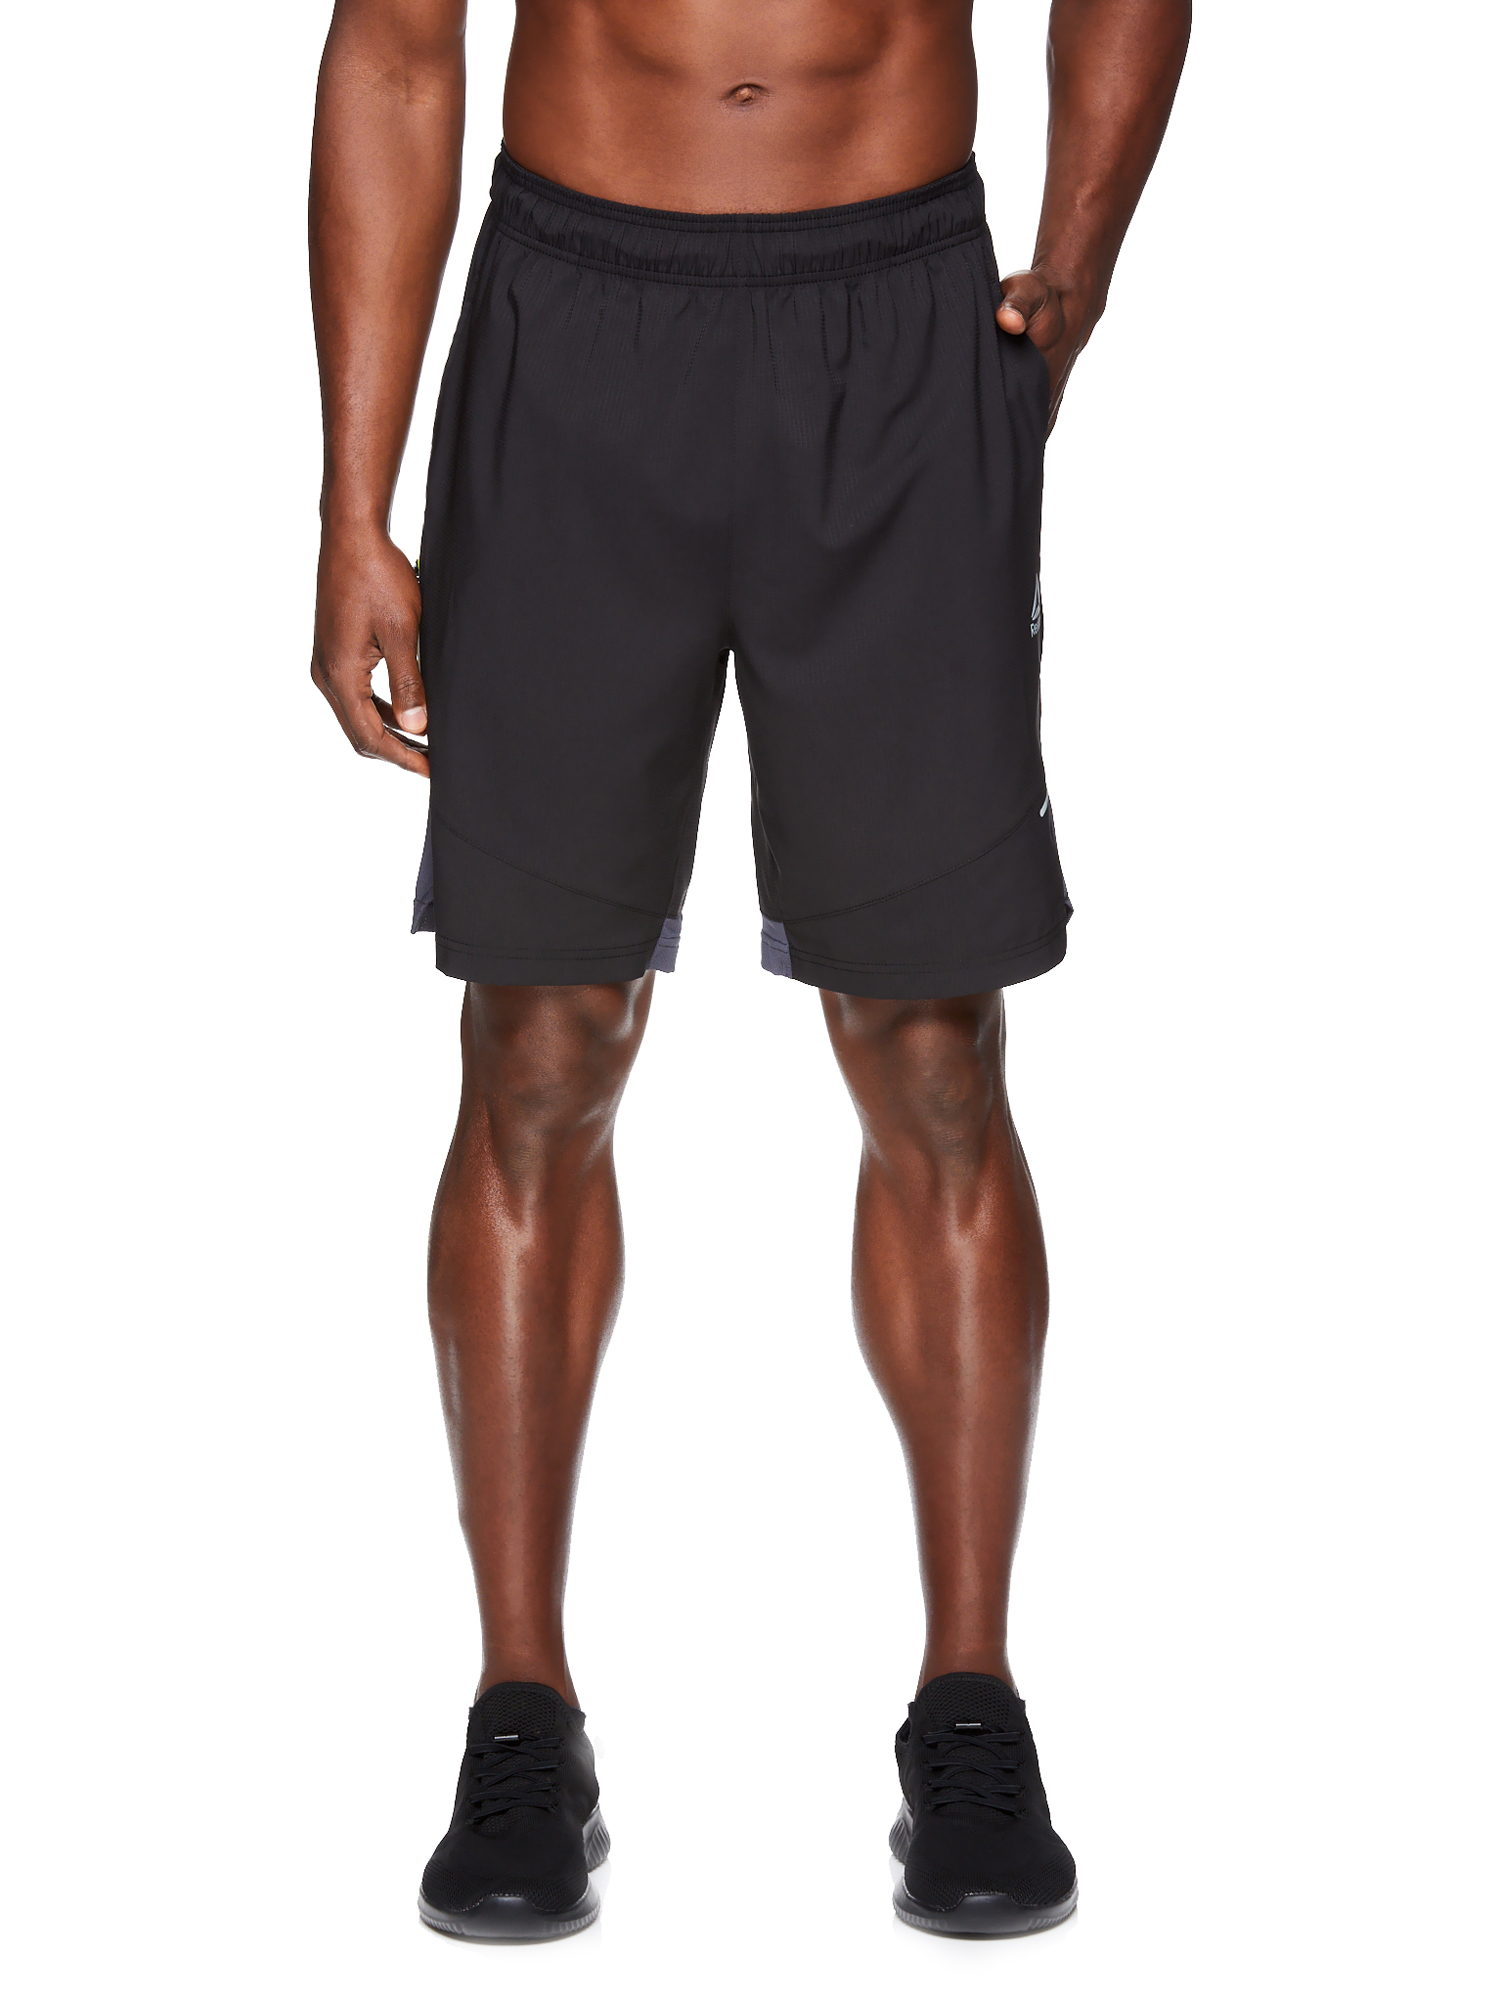 Reebok Men's and Big Men's Active Unstoppable Woven Short, up to Size 3XL - image 1 of 4